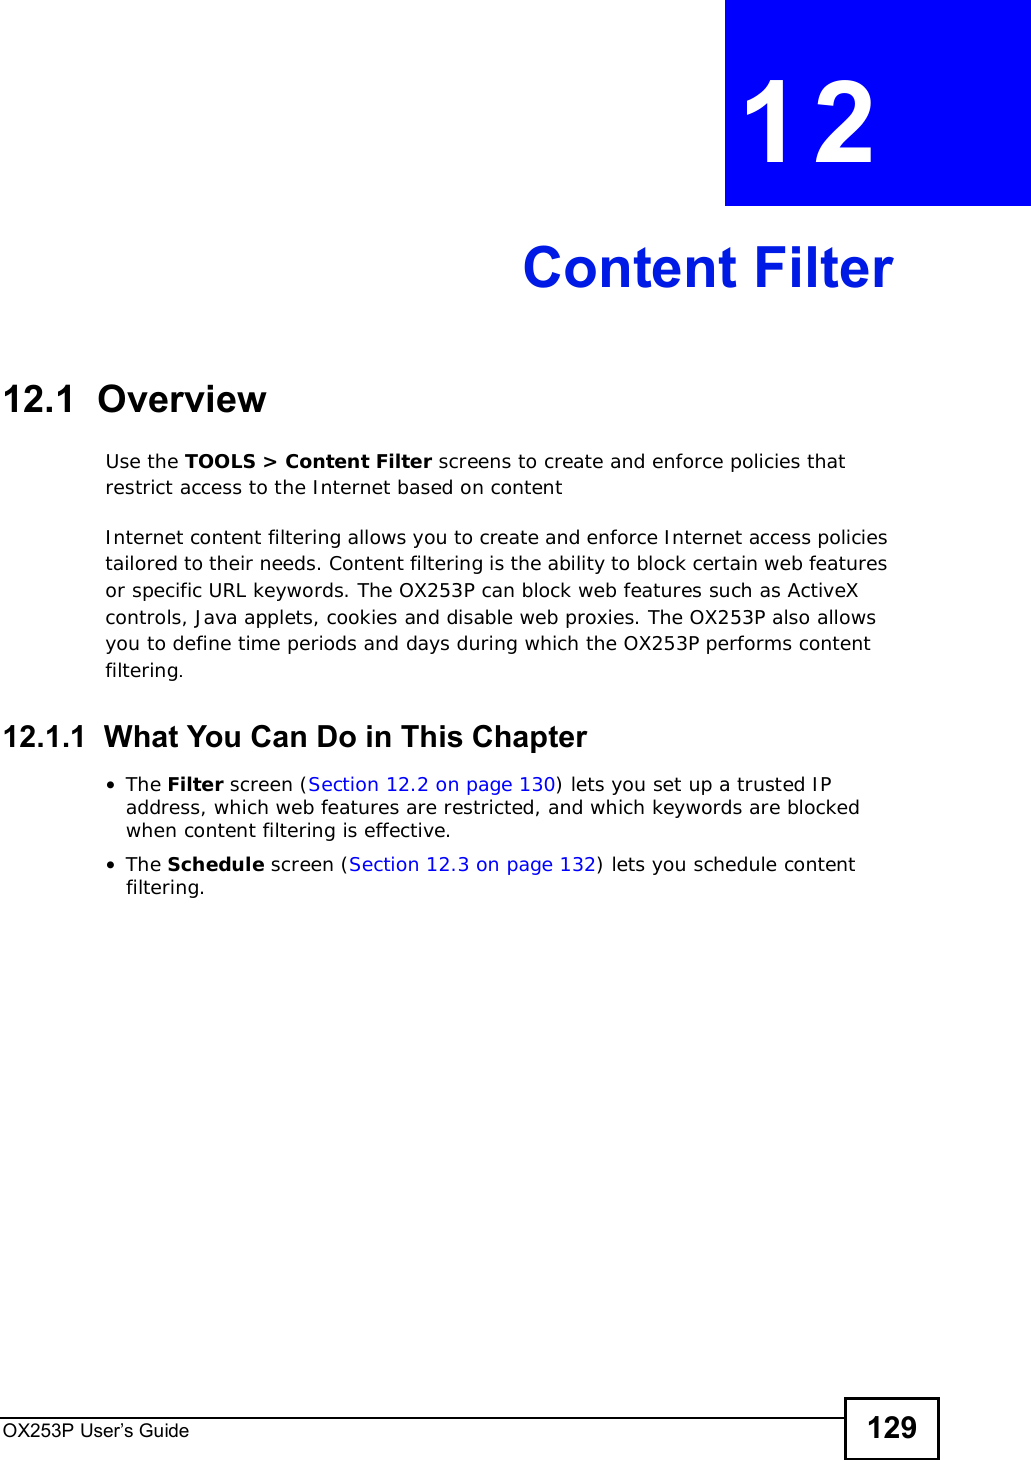 OX253P User’s Guide 129CHAPTER 12Content Filter12.1  OverviewUse the TOOLS &gt; Content Filter screens to create and enforce policies that restrict access to the Internet based on contentInternet content filtering allows you to create and enforce Internet access policies tailored to their needs. Content filtering is the ability to block certain web features or specific URL keywords. The OX253P can block web features such as ActiveX controls, Java applets, cookies and disable web proxies. The OX253P also allows you to define time periods and days during which the OX253P performs content filtering.12.1.1  What You Can Do in This Chapter•The Filter screen (Section 12.2 on page 130) lets you set up a trusted IP address, which web features are restricted, and which keywords are blocked when content filtering is effective.•The Schedule screen (Section 12.3 on page 132) lets you schedule content filtering.